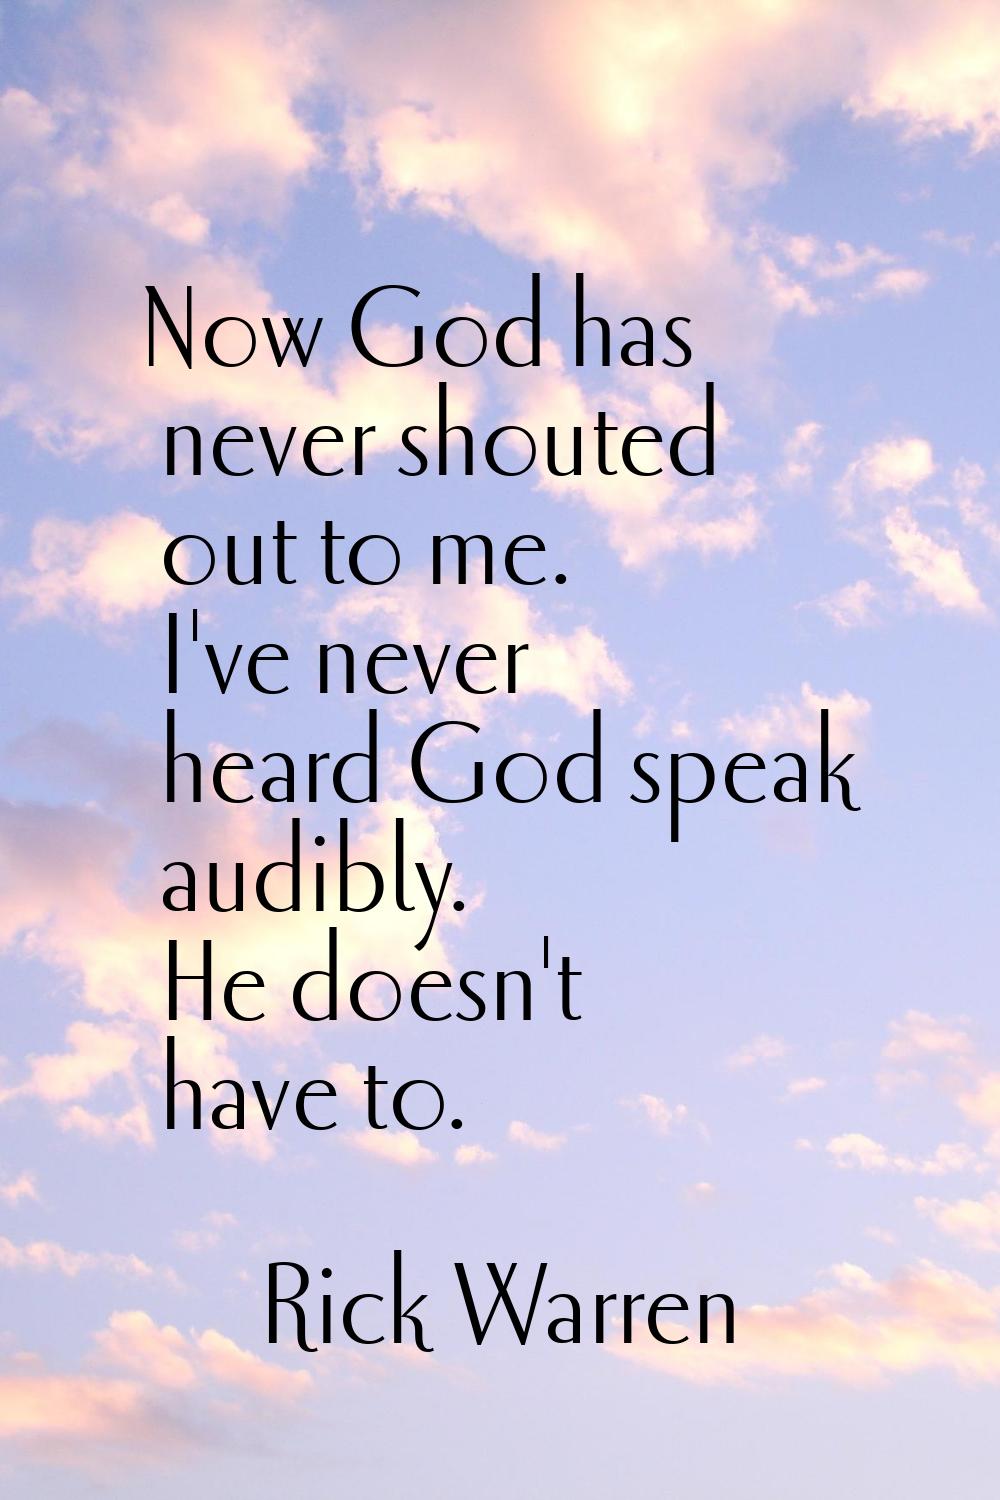 Now God has never shouted out to me. I've never heard God speak audibly. He doesn't have to.